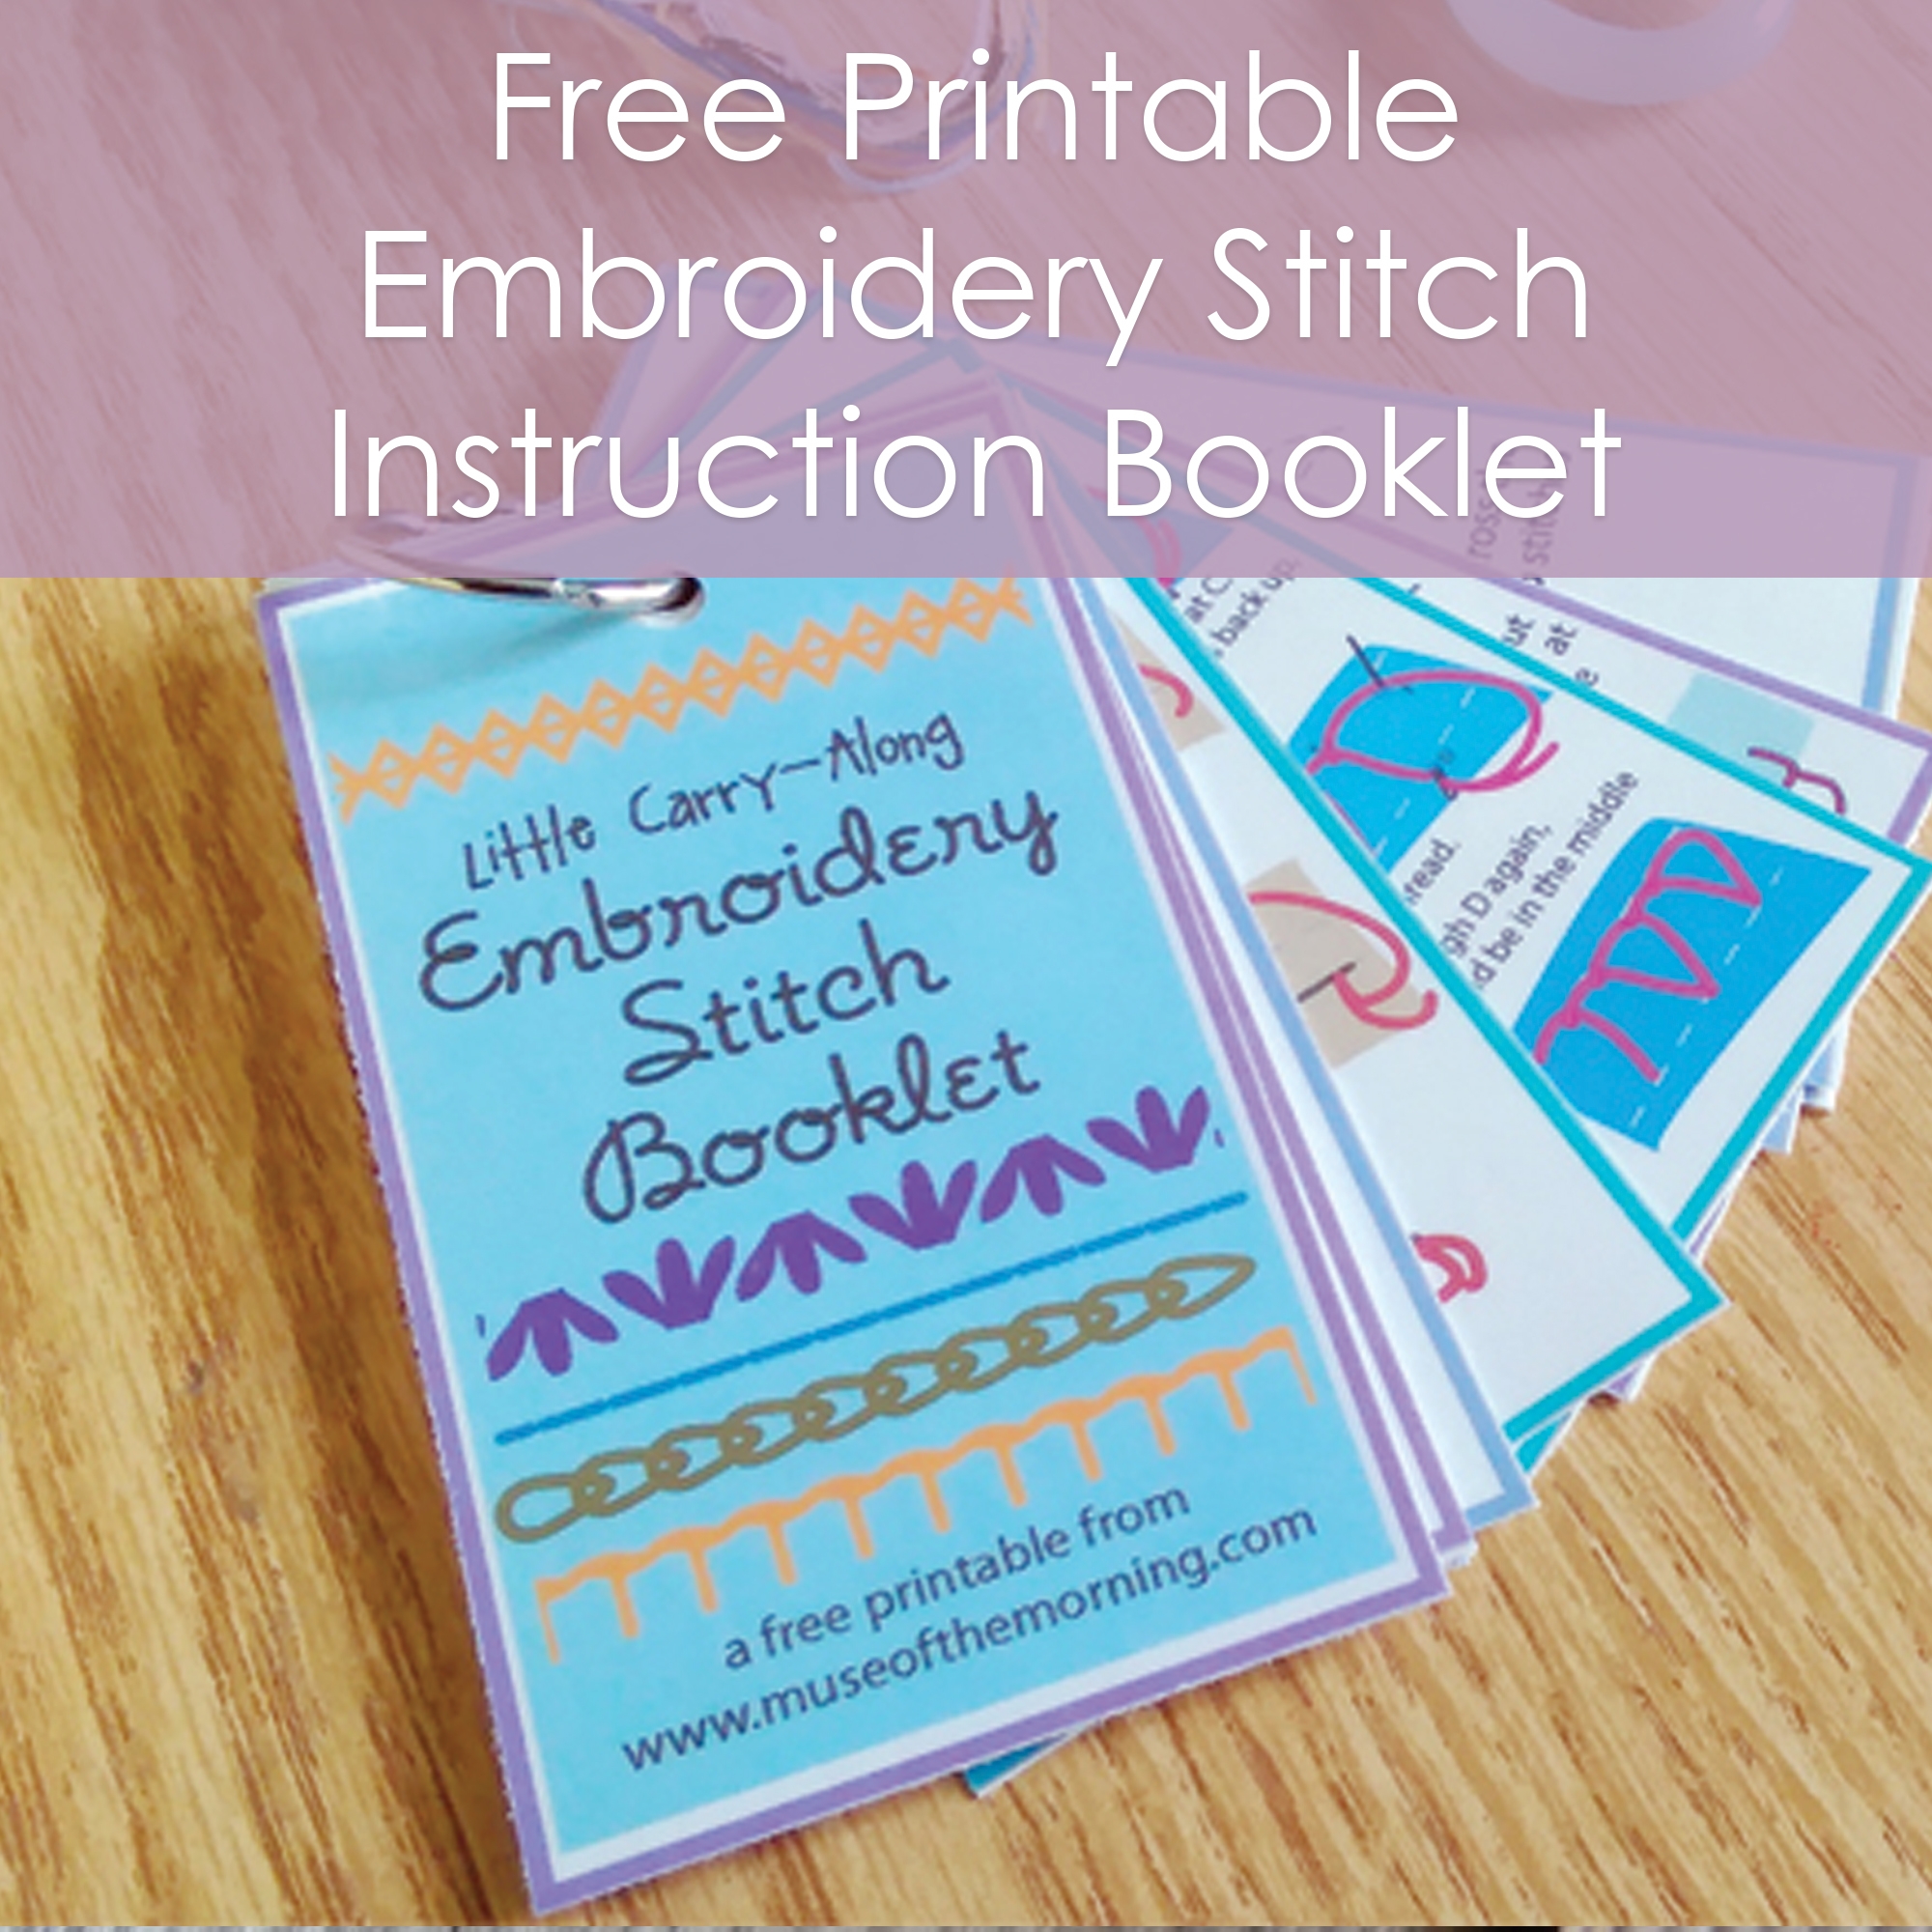 Free Printable Embroidery Stitch Binder Ring Instruction Booklet Muse Of The Morning Hand Dyed Embroidery Floss Fabric PDF Embroidery Patterns